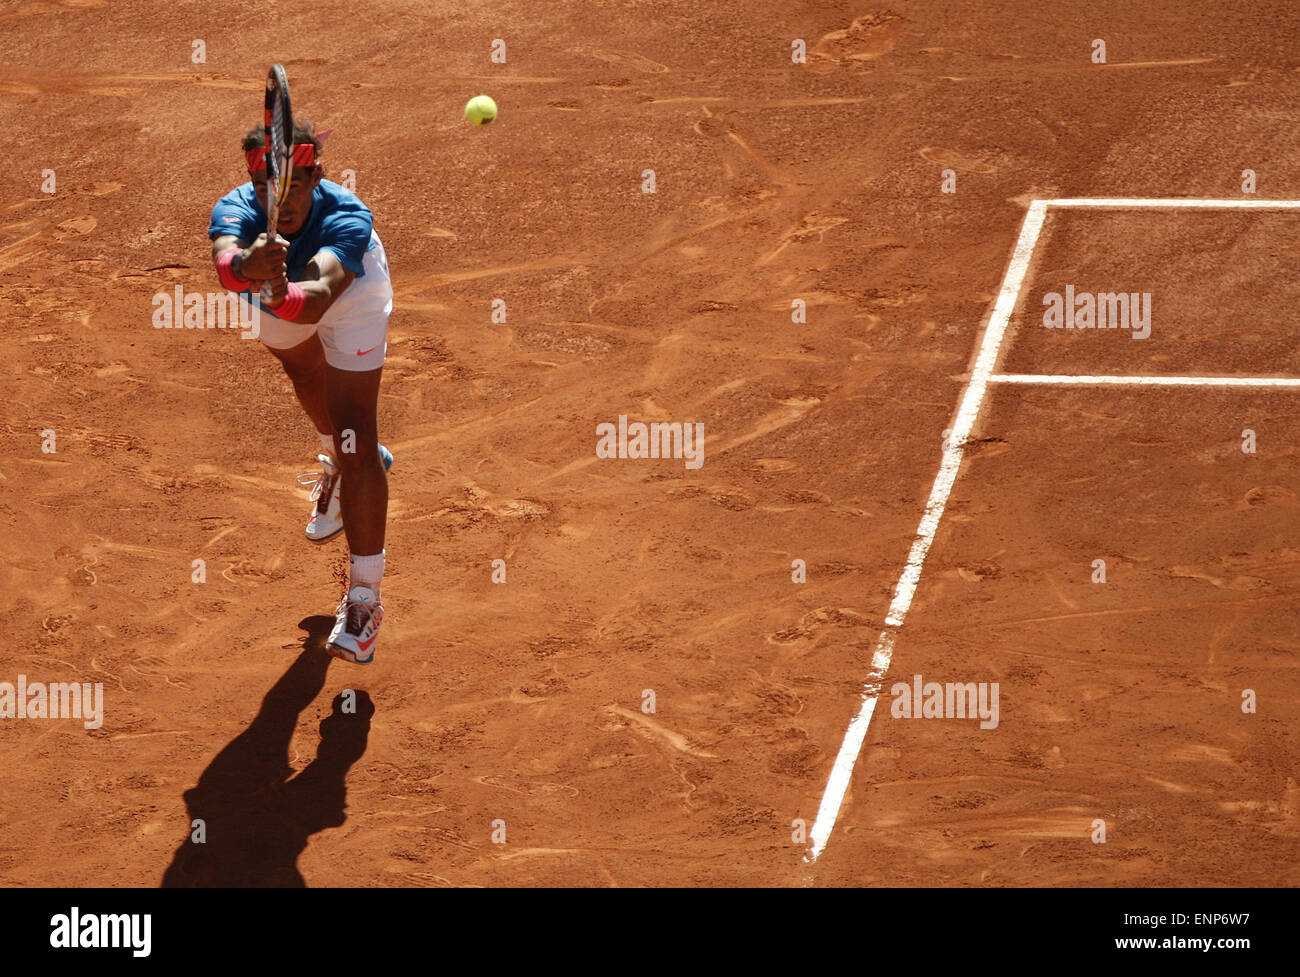 Madrid, Spain. 9th May, 2015. 09.05.2015 Madrid, Spain. Rafael Nadal reached 94th career final with a 7-6 (3), 6-1 win over Tomas Berdych. Will face Murray or Nishikori for Madrid title. Credit:  Michael Cullen/ZUMA Wire/Alamy Live News Stock Photo